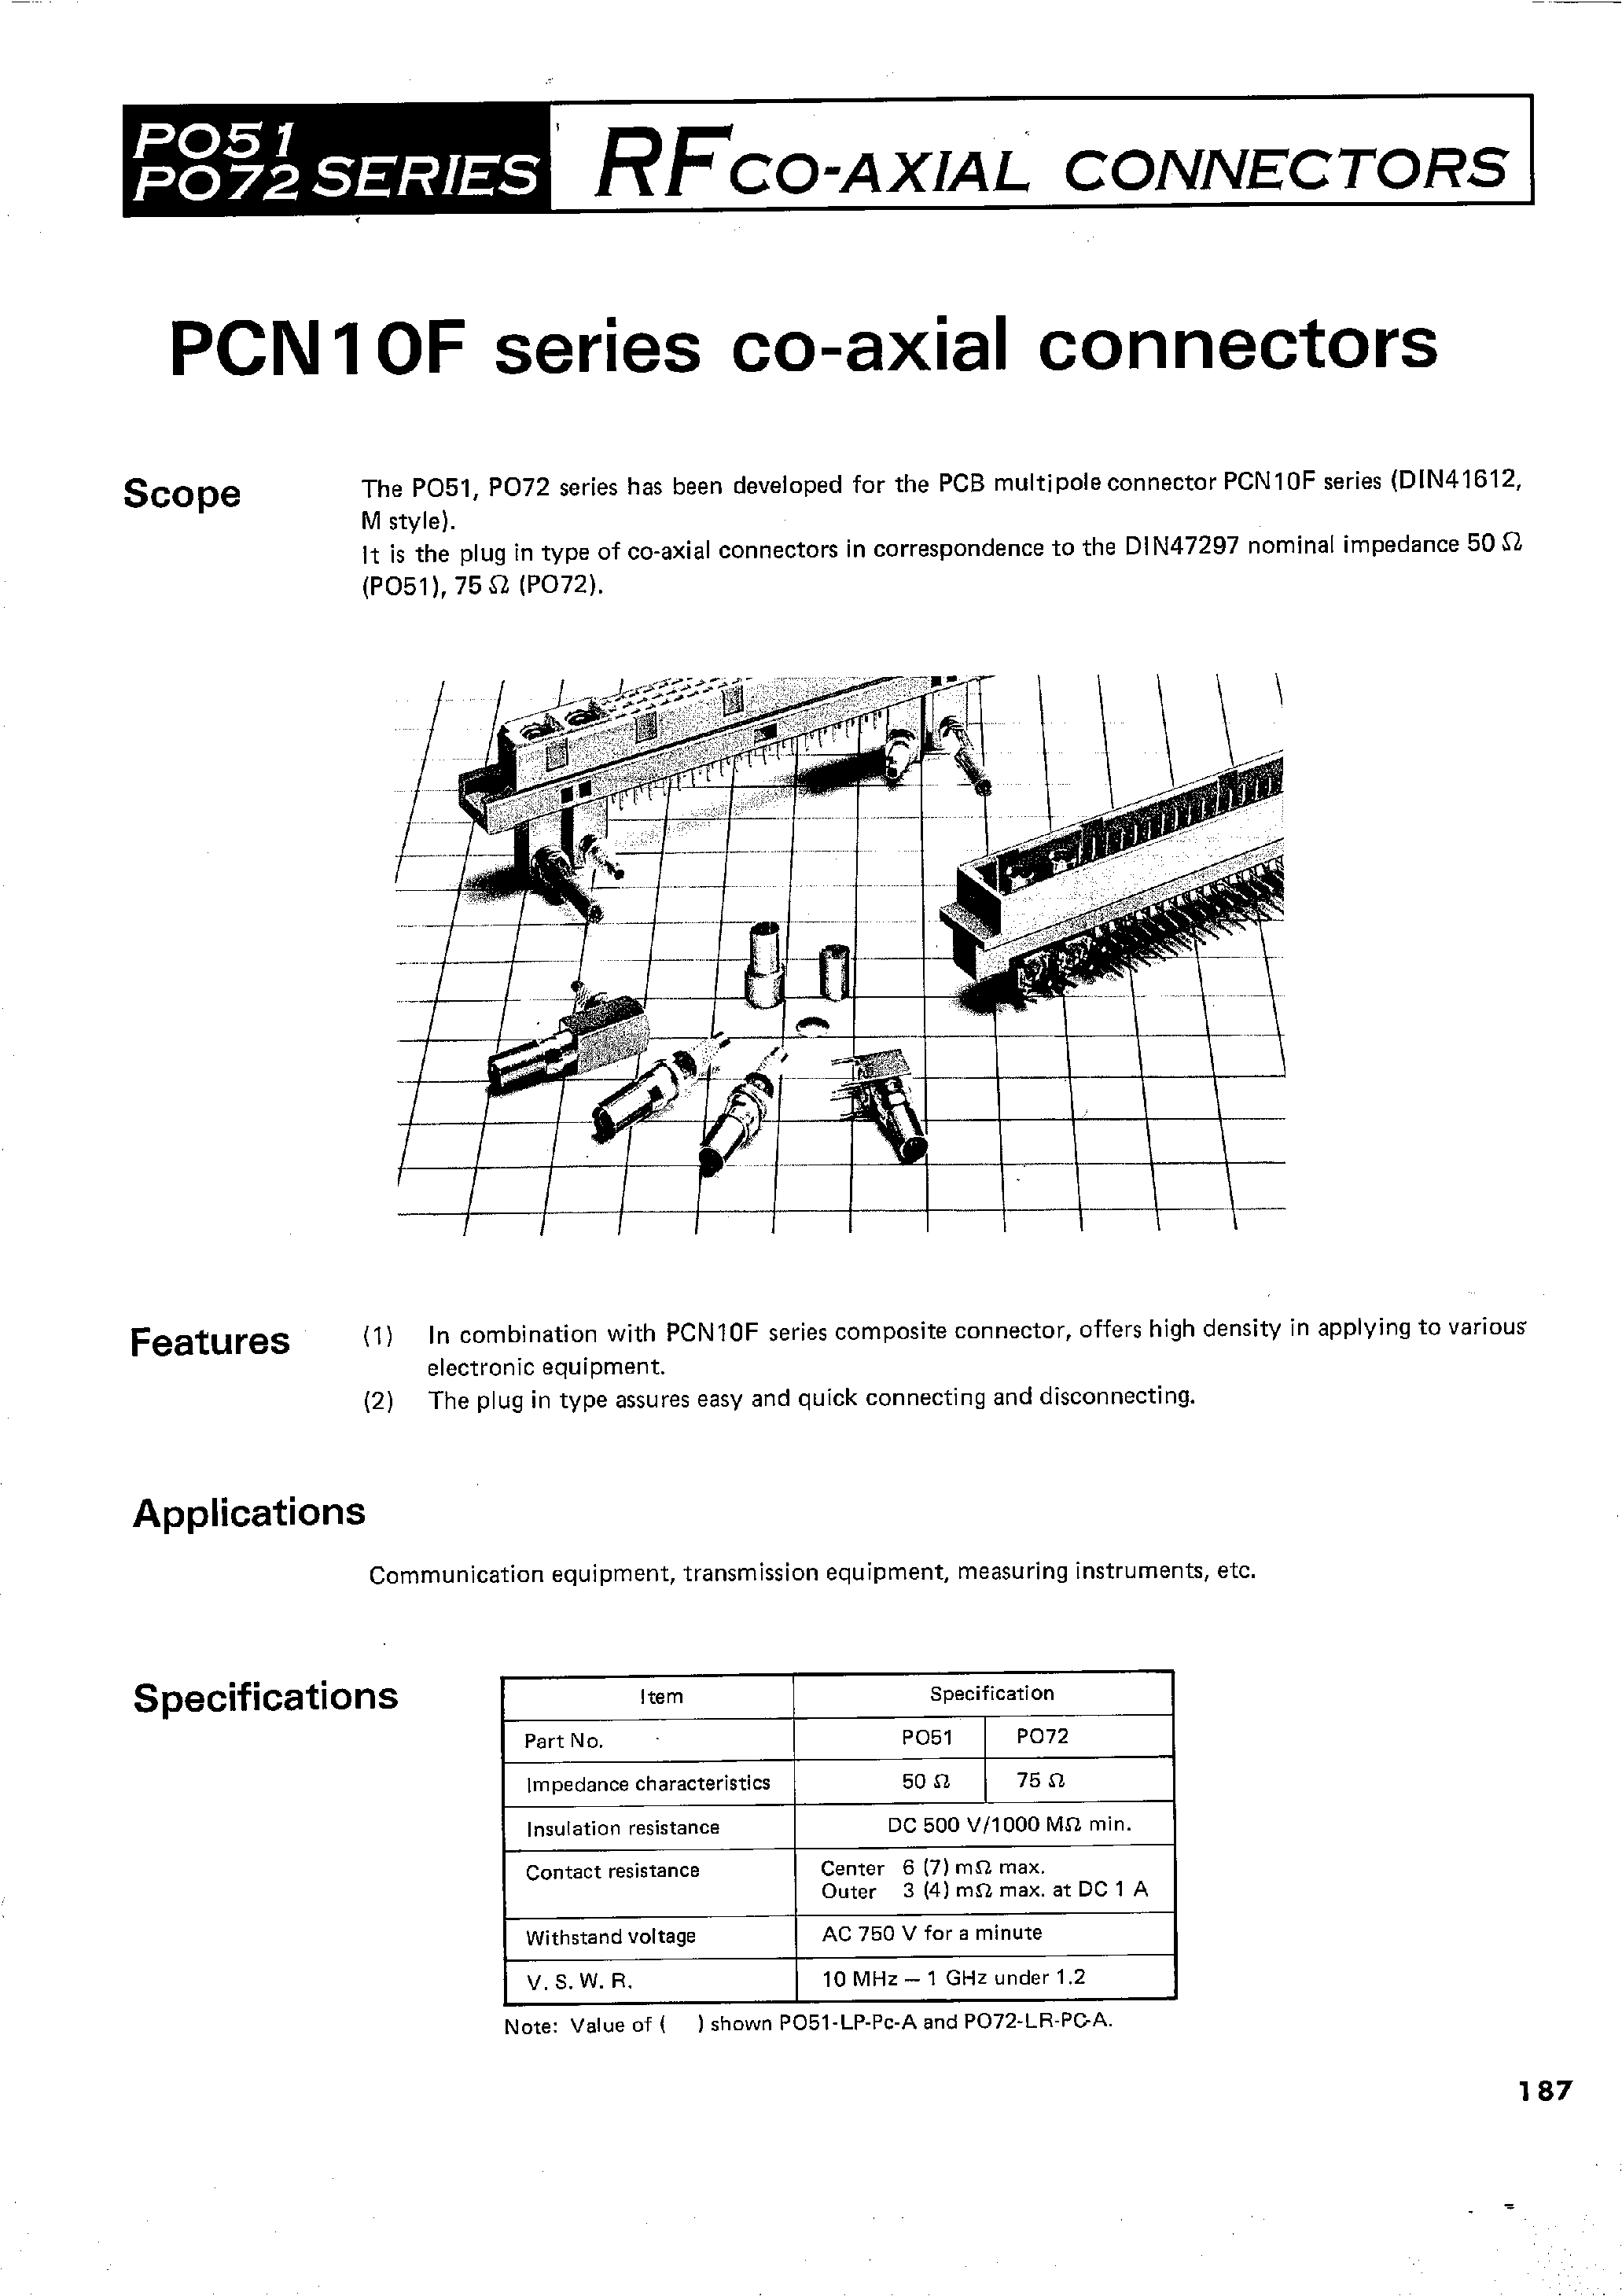 Datasheet PO51J-T-1S - RFCO-AXIAL CONNECTORS page 1